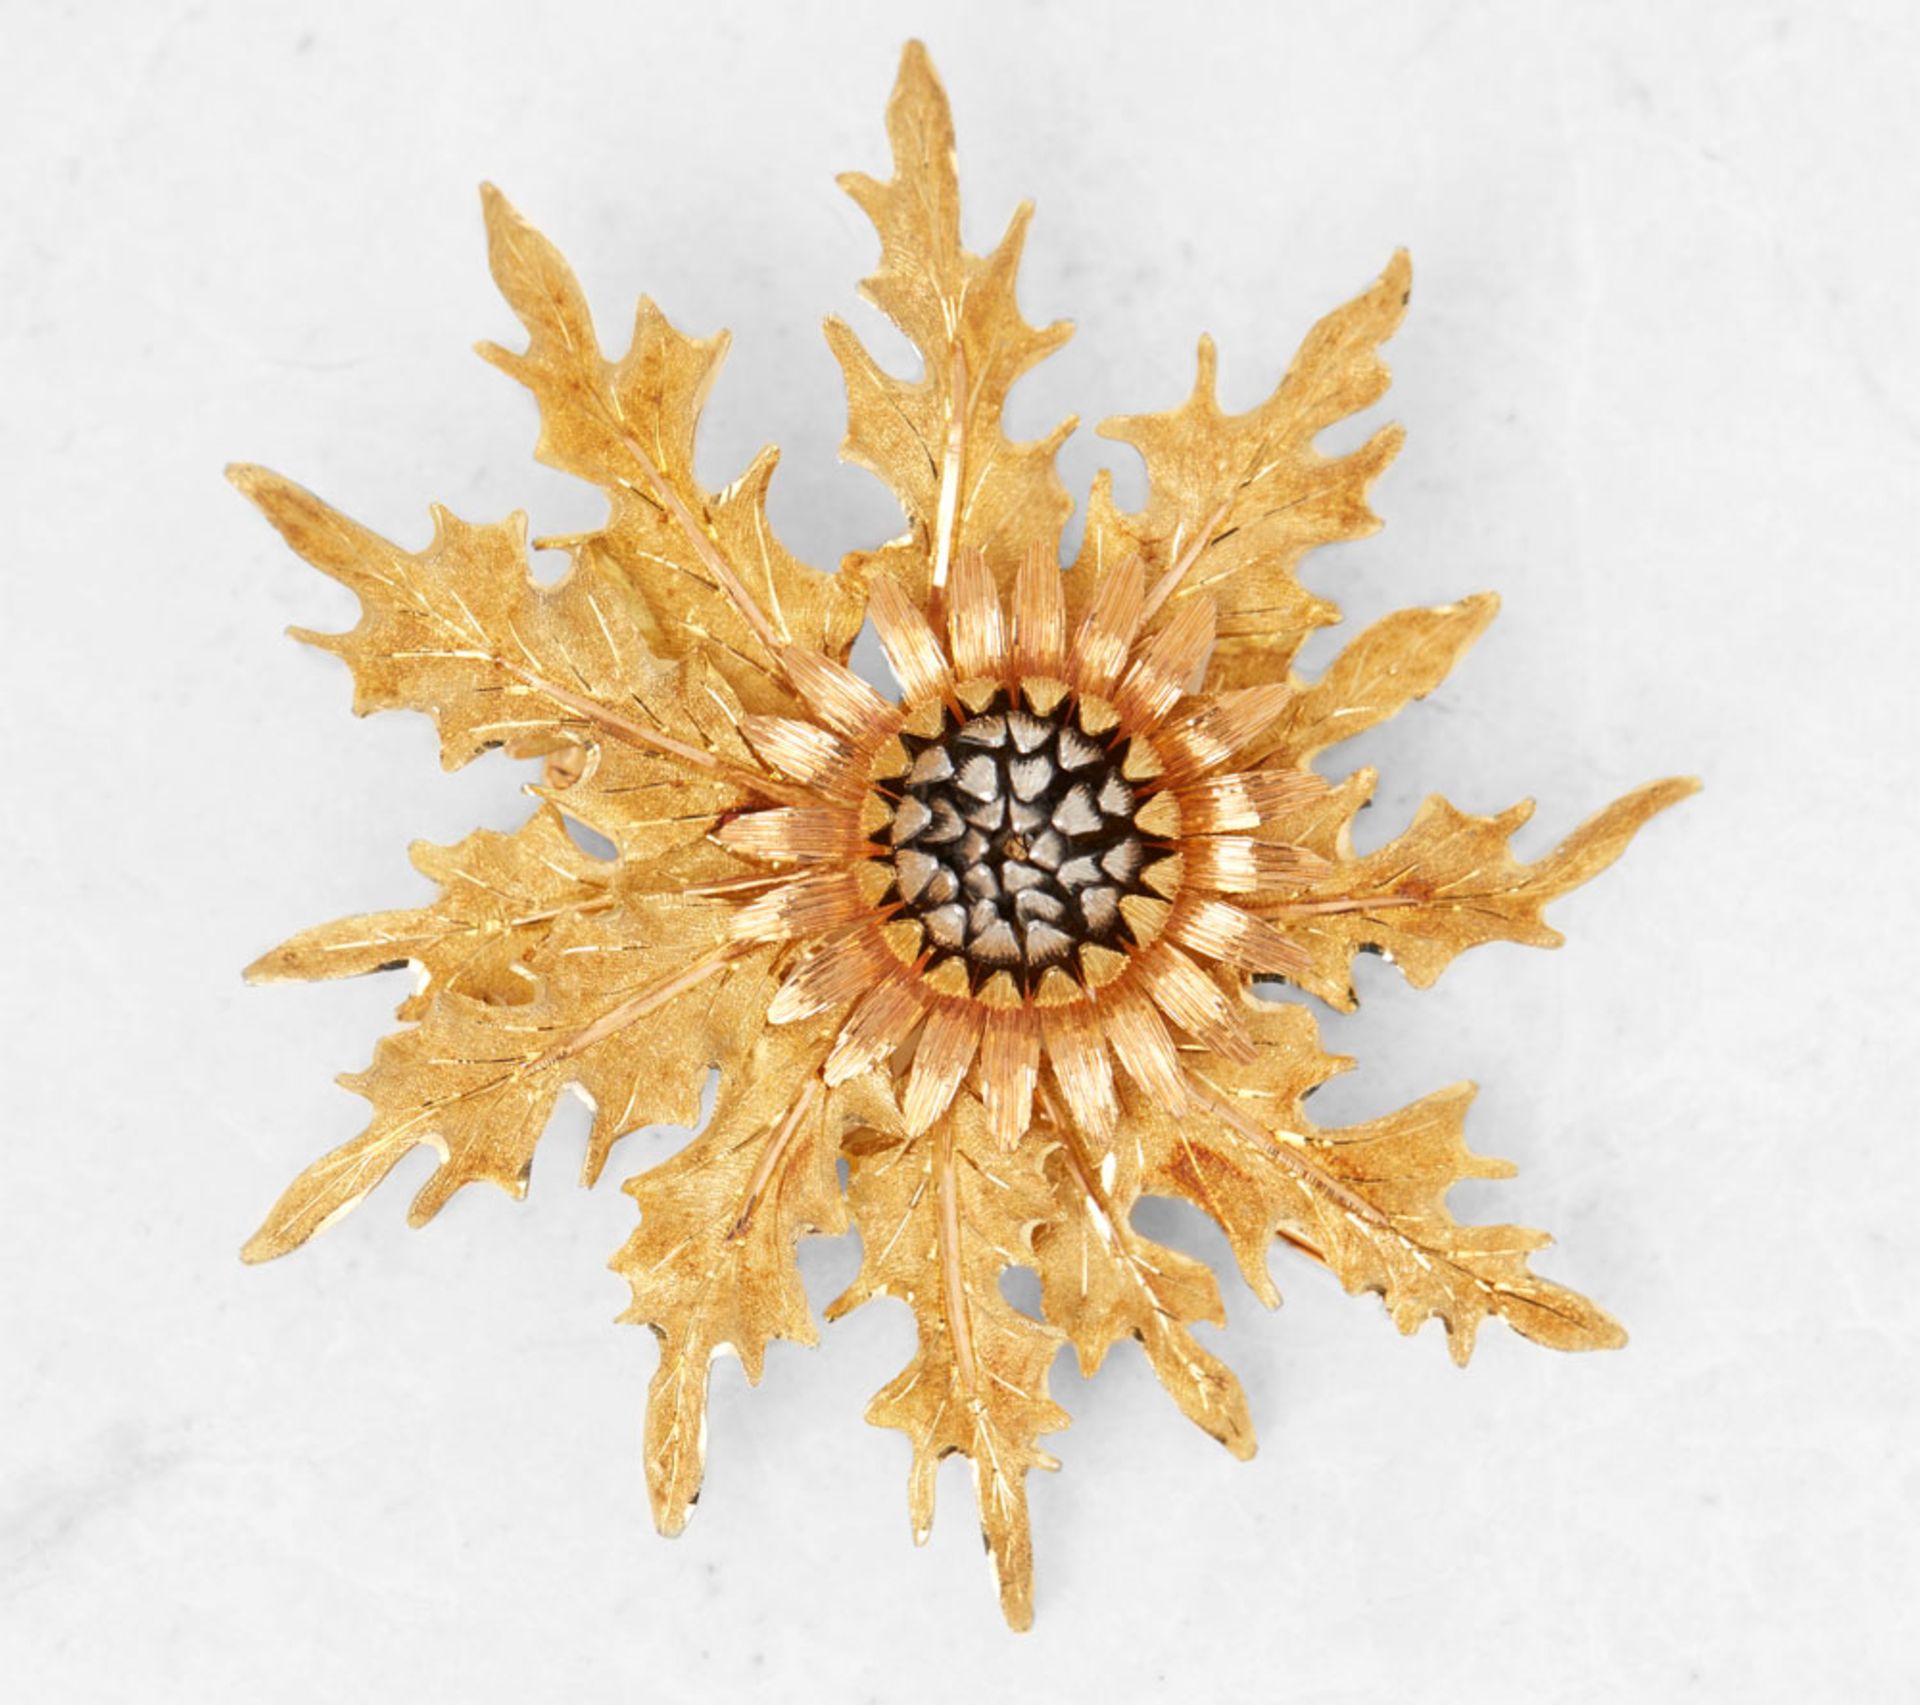 Buccellati 18k Yellow, White & Rose Gold Thistle Brooch - Image 4 of 5